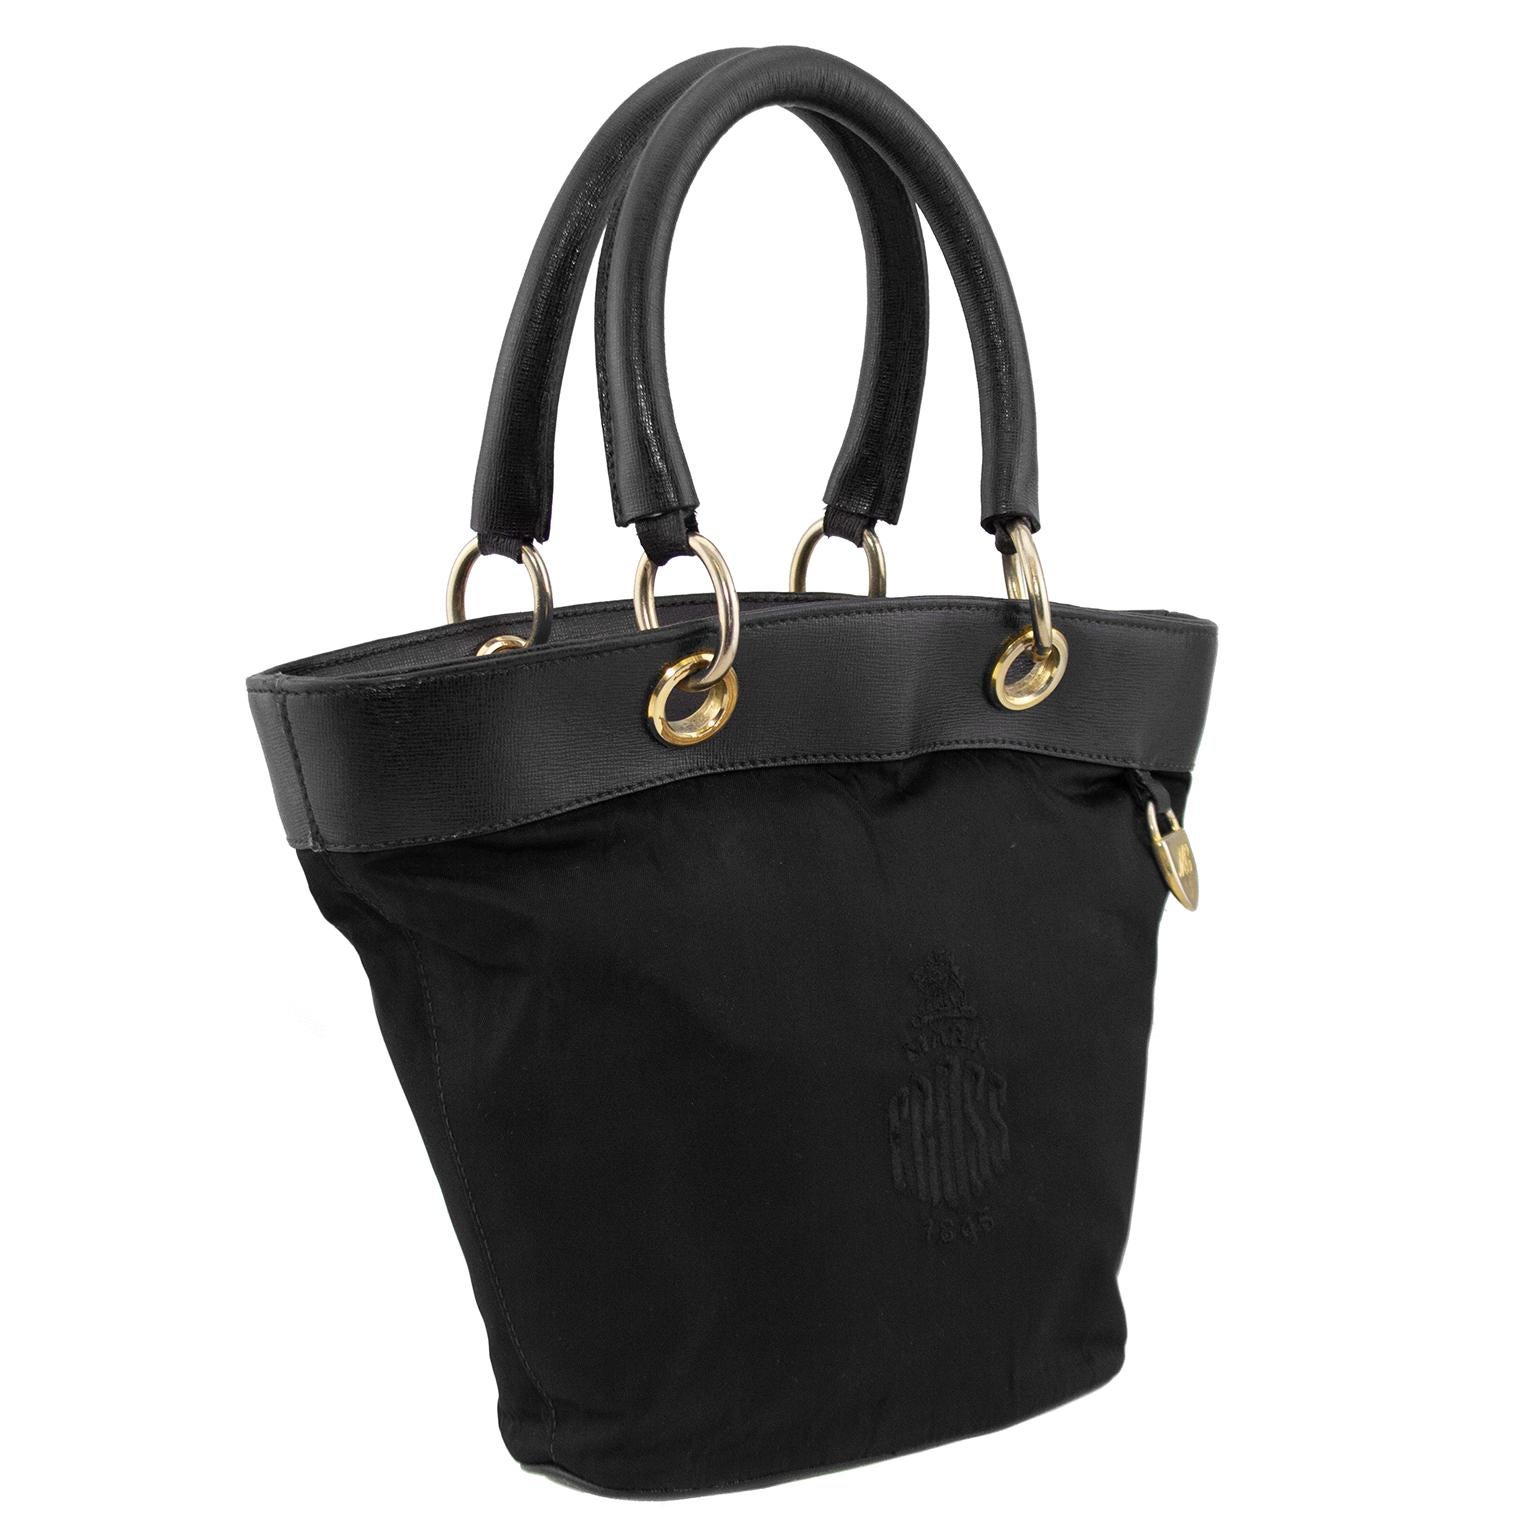 Very cute Mark Cross double handle bucket bag from the late 1980s. Black nylon with Mark Cross logo embroidered at centre front. Black leather handles, trim and base. Contrasting gold tone hardware and small gold MC engraved charm. Black interior